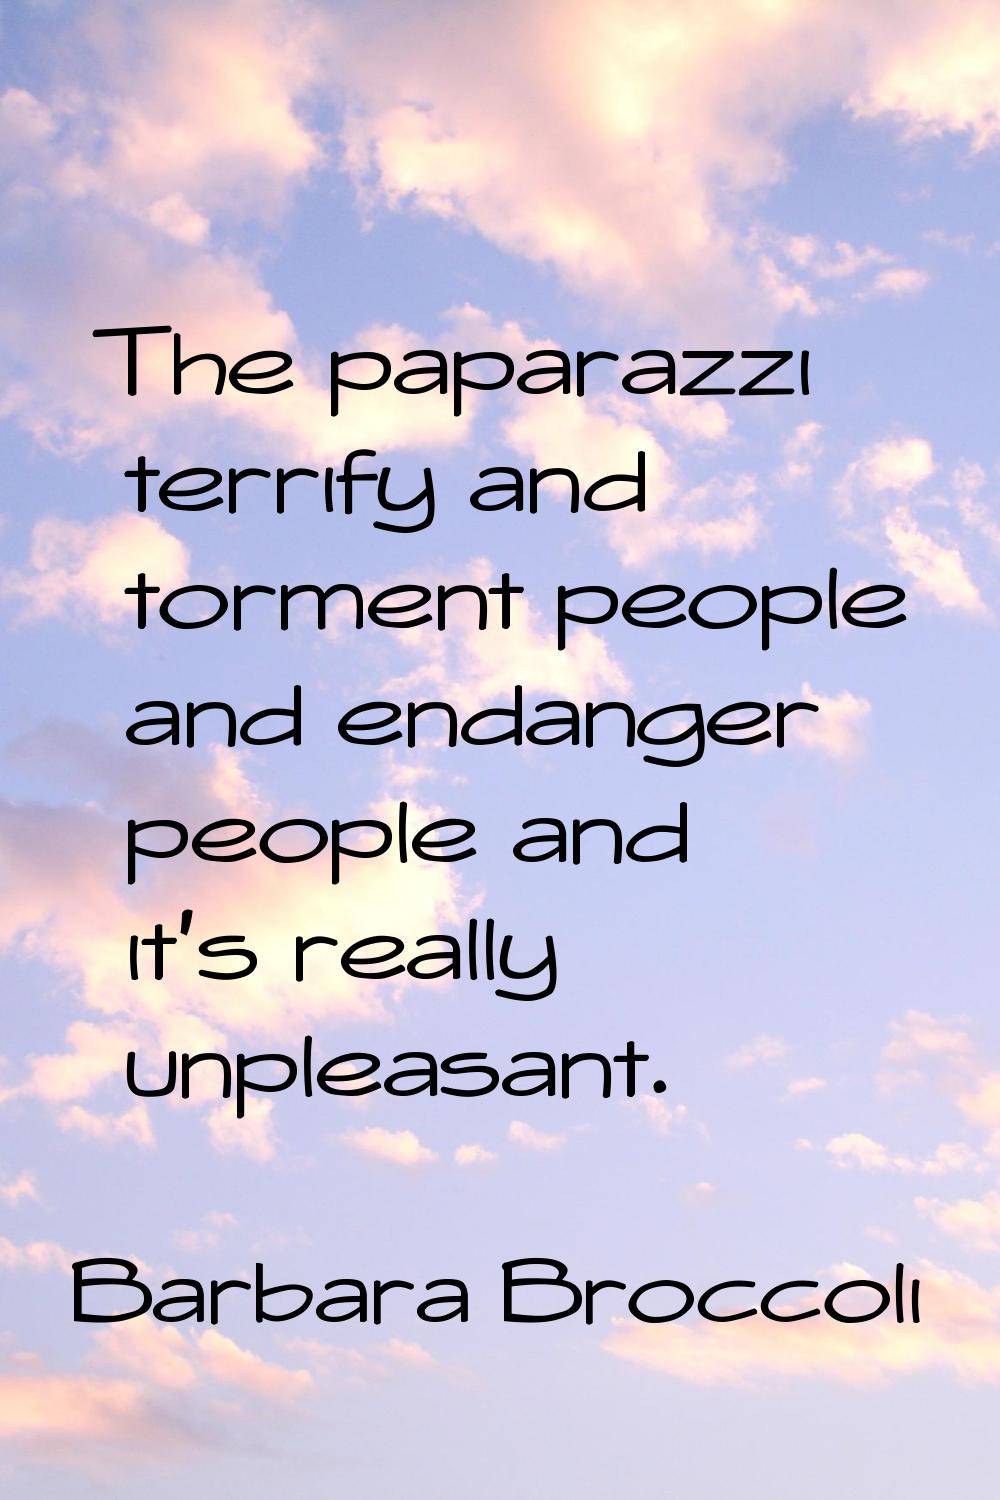 The paparazzi terrify and torment people and endanger people and it's really unpleasant.